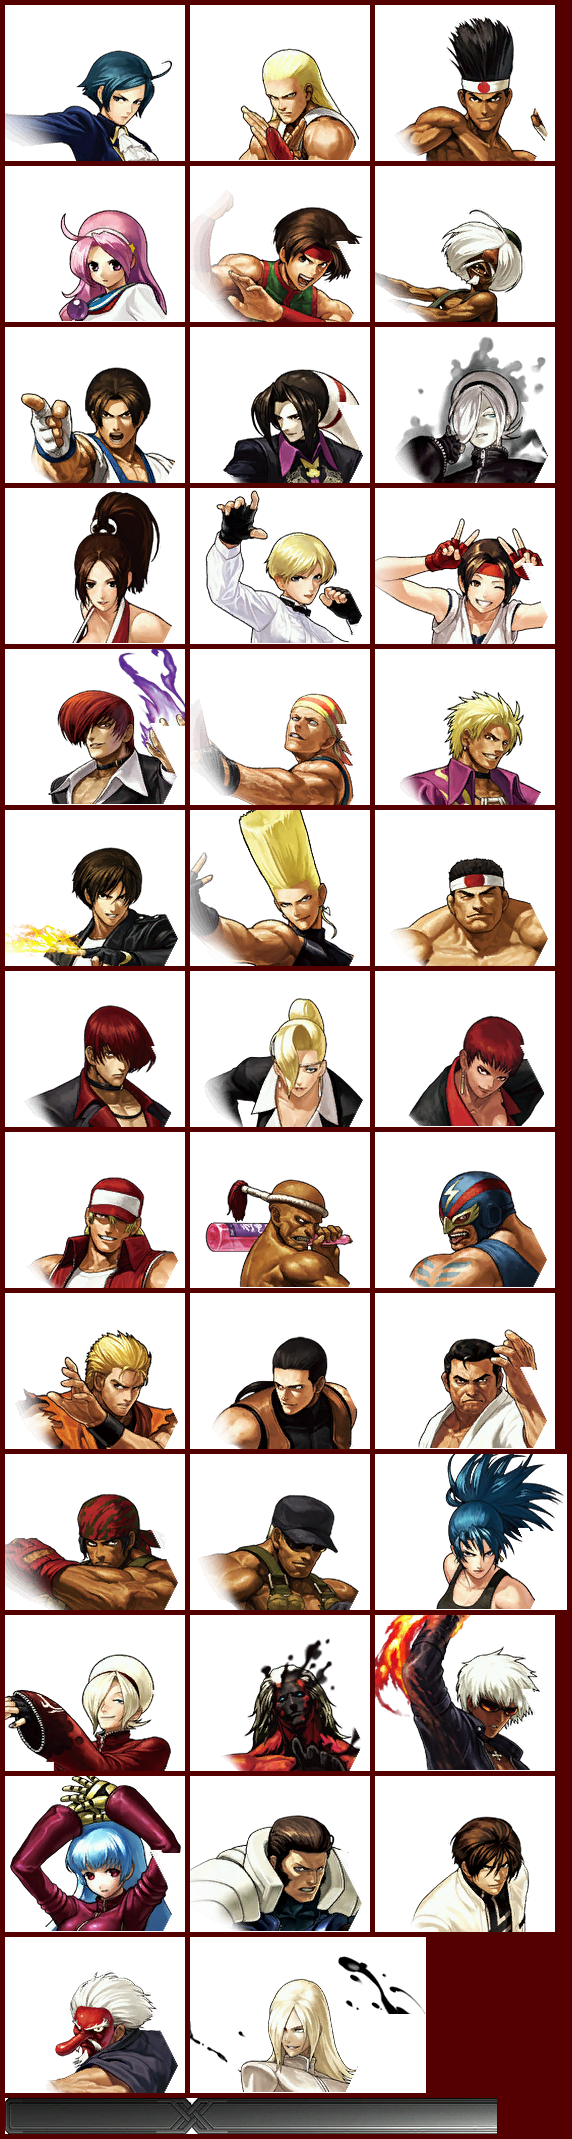 The King of Fighters XIII - Battle Portraits